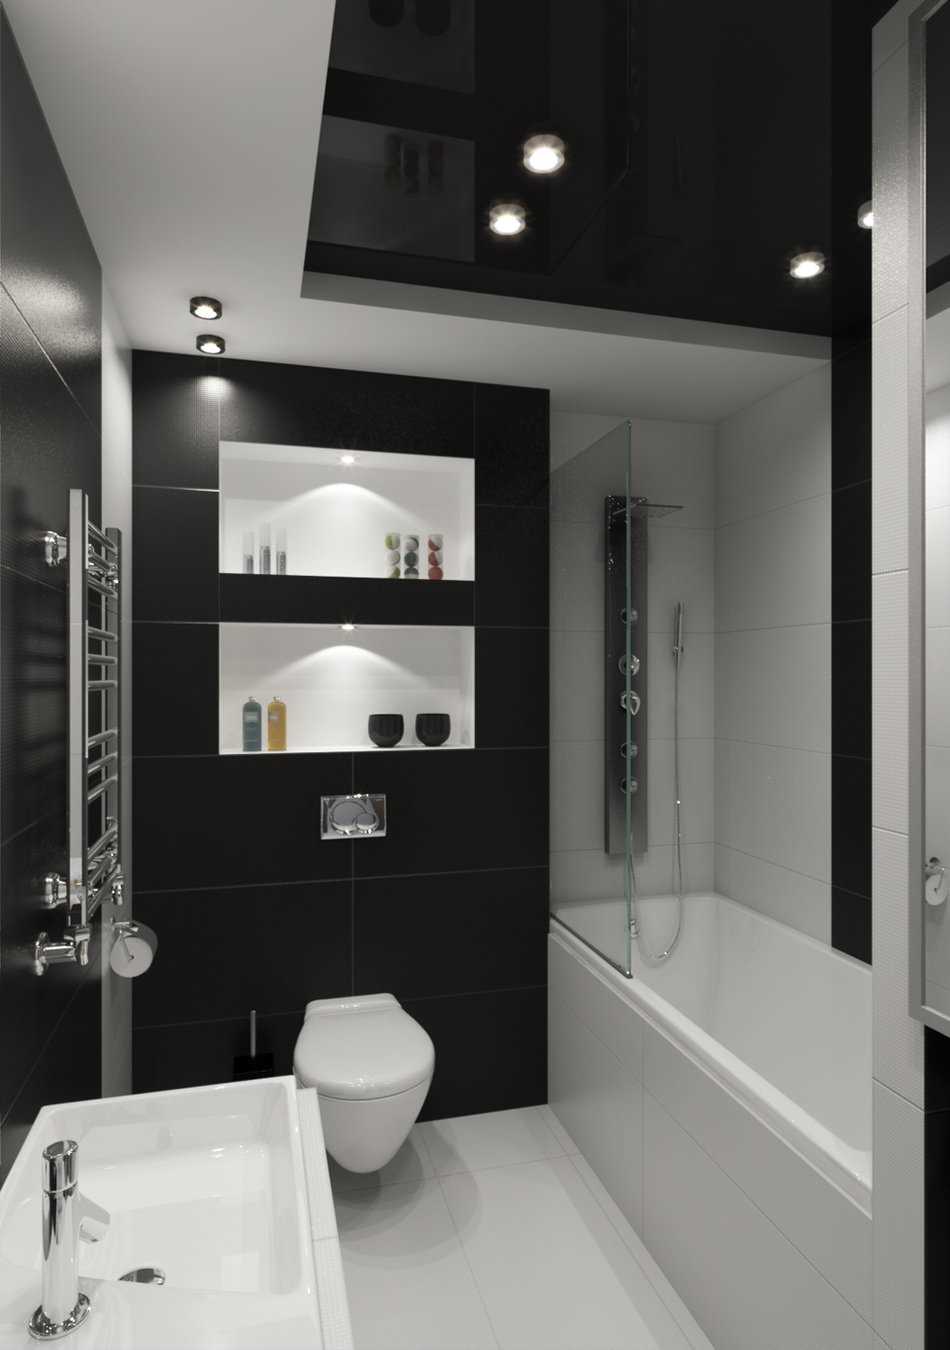 variant of the bright bathroom design in black and white